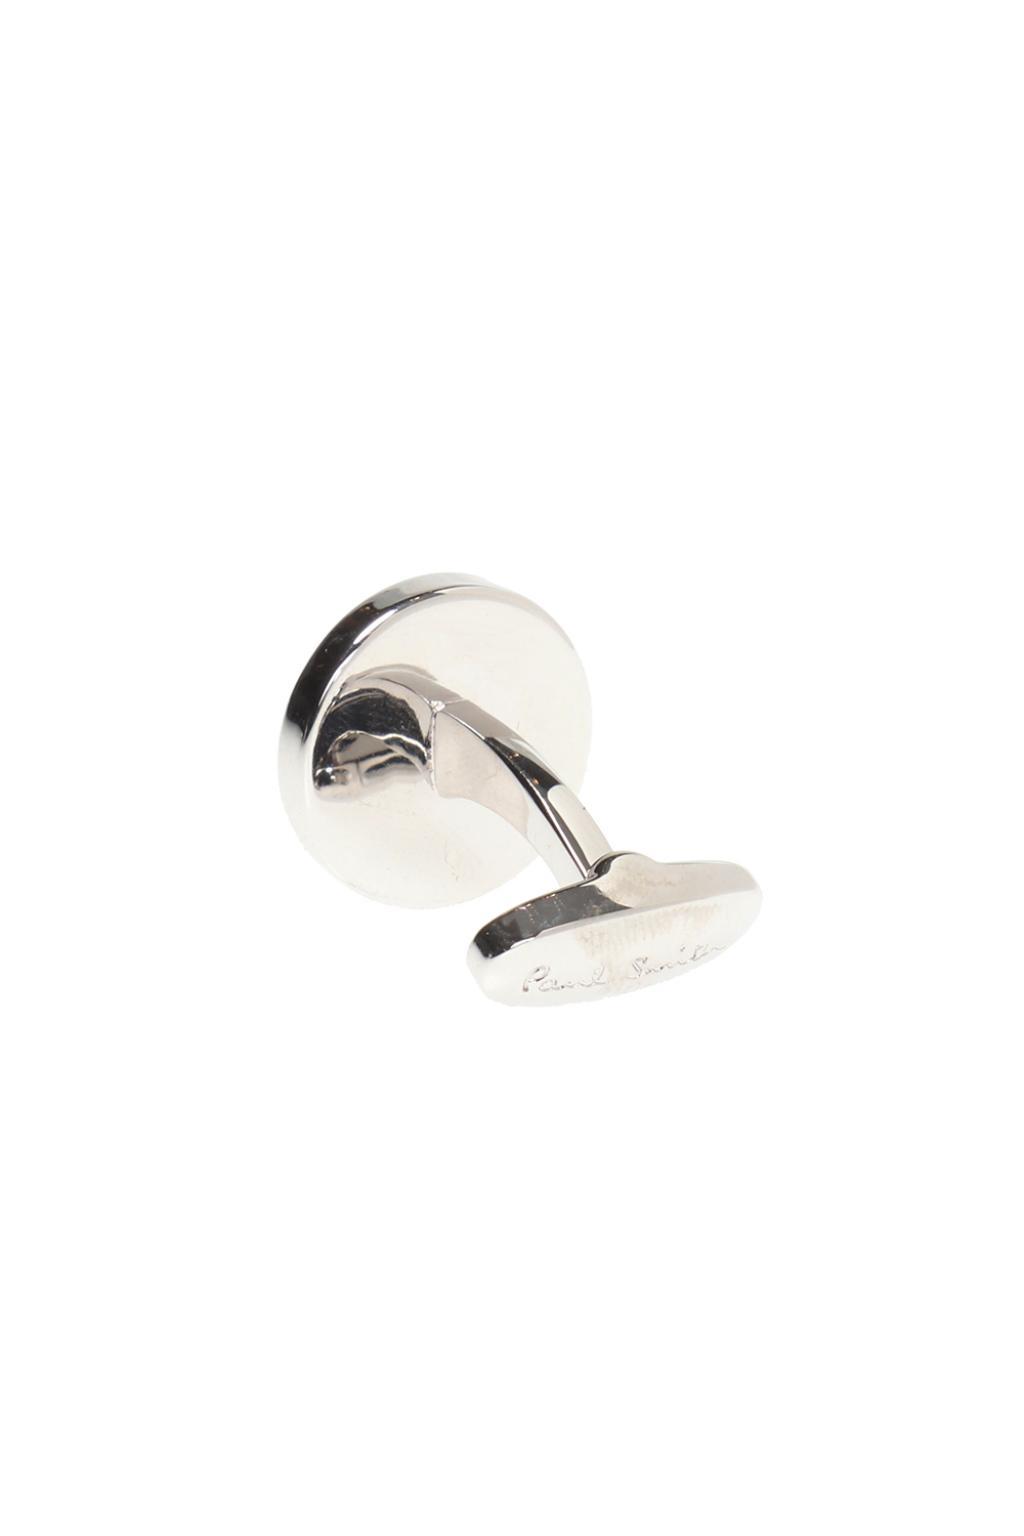 Paul Smith Silver And Multicolor Logo Cufflinks in Metallic for Men